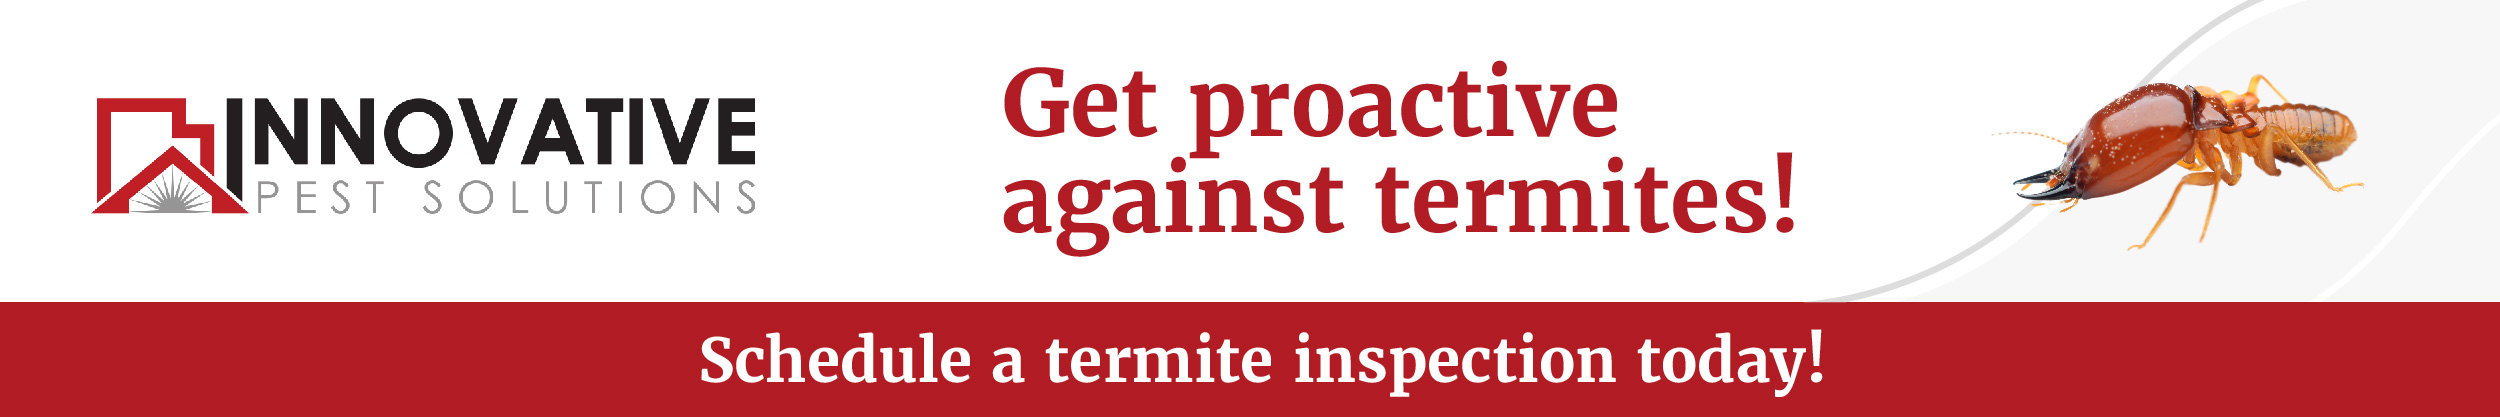 A CTA for termite inspection services